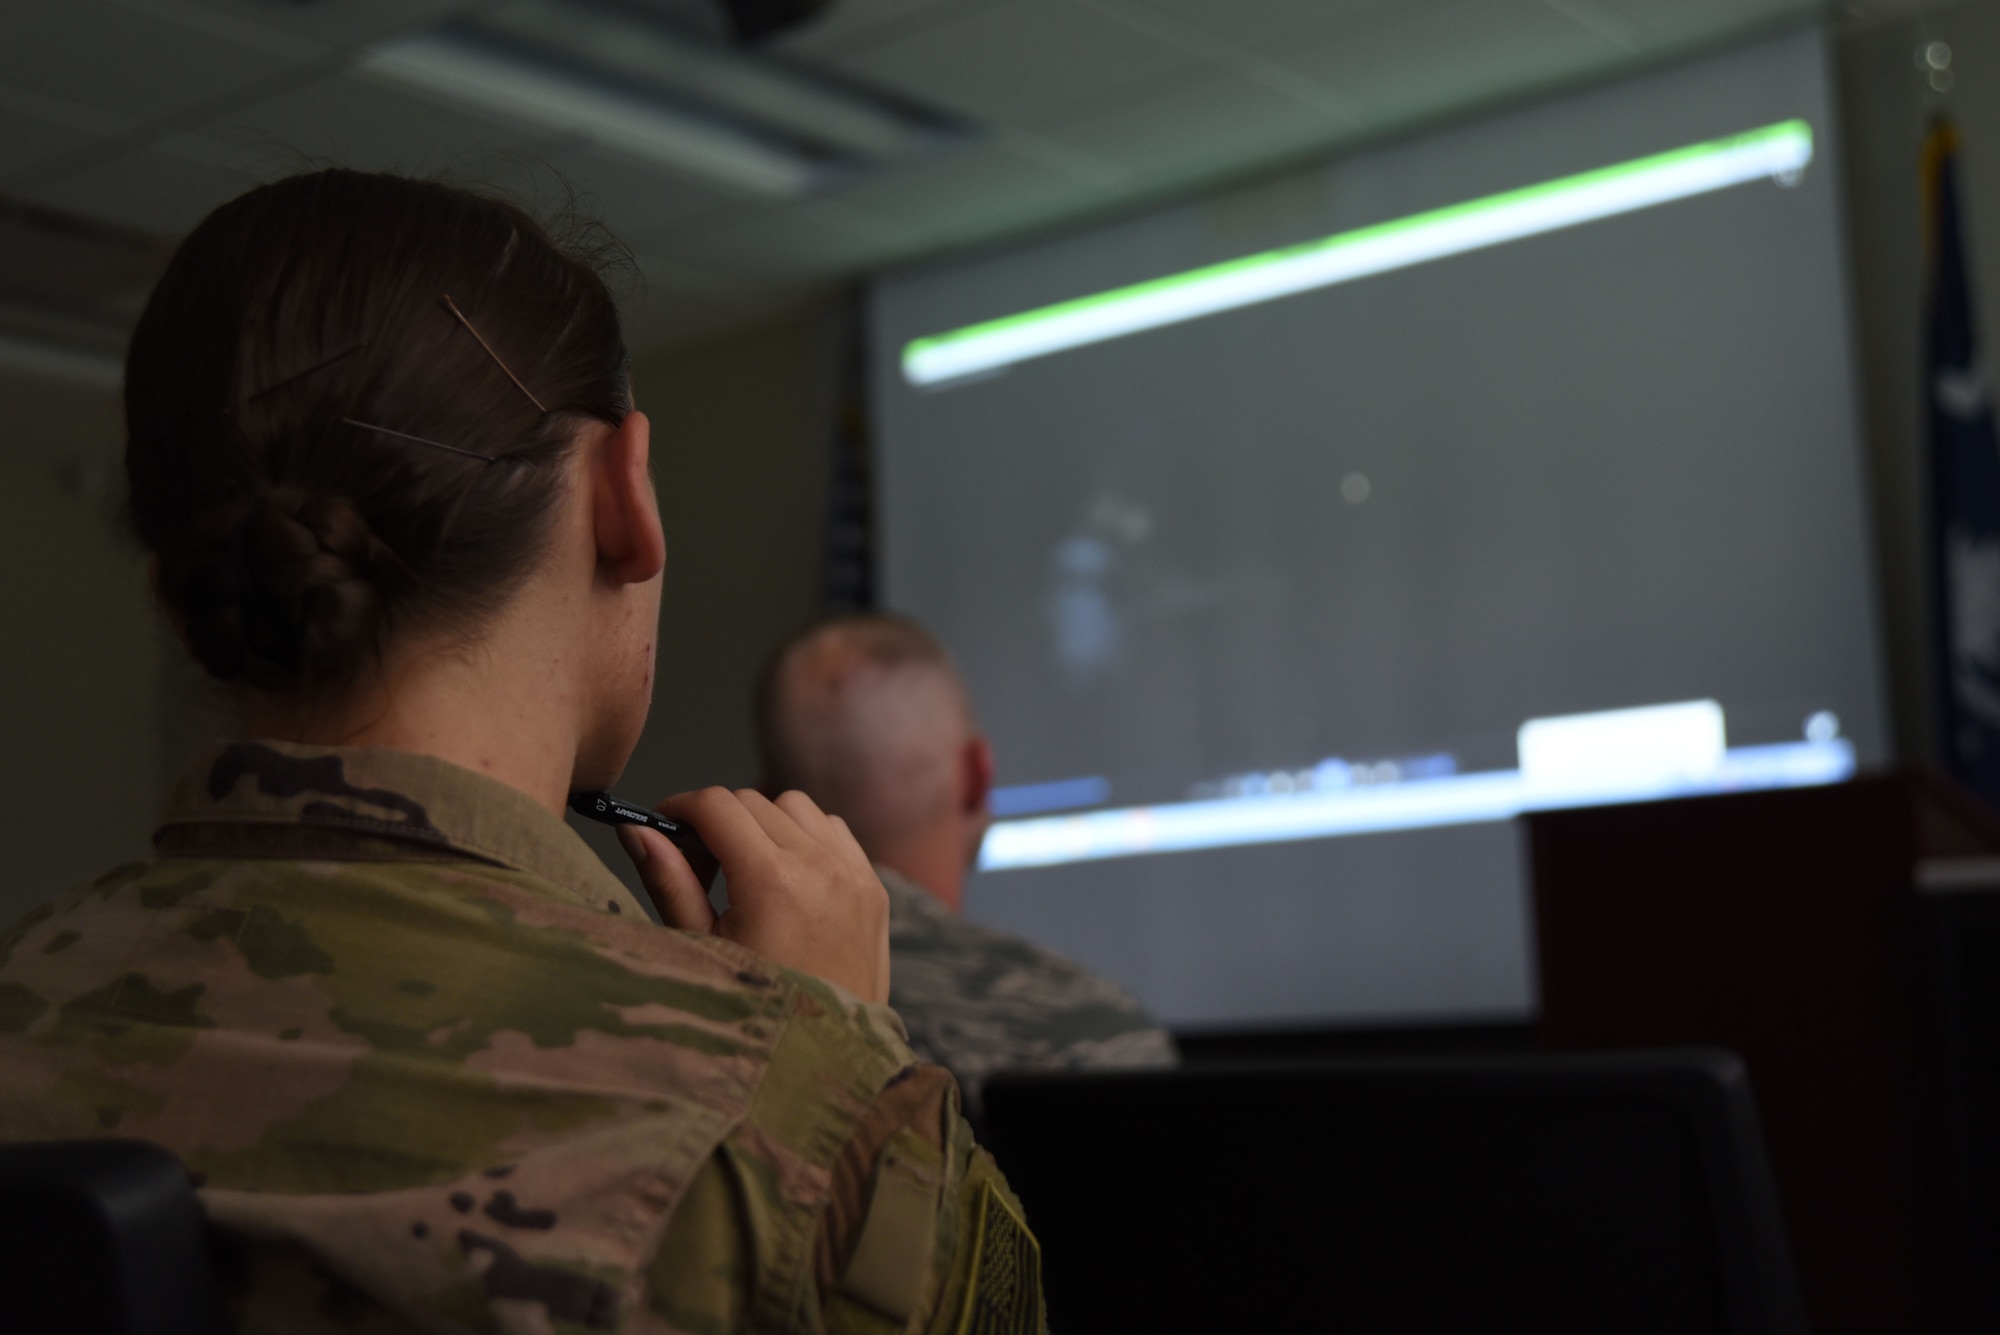 U.S. Airmen watch a video about the Air Force Office of Special Investigations (AFOSI) during an AFOSI recruiting team visit to the Spratt Education Center at Shaw Air Force Base, S.C., July 30, 2018.